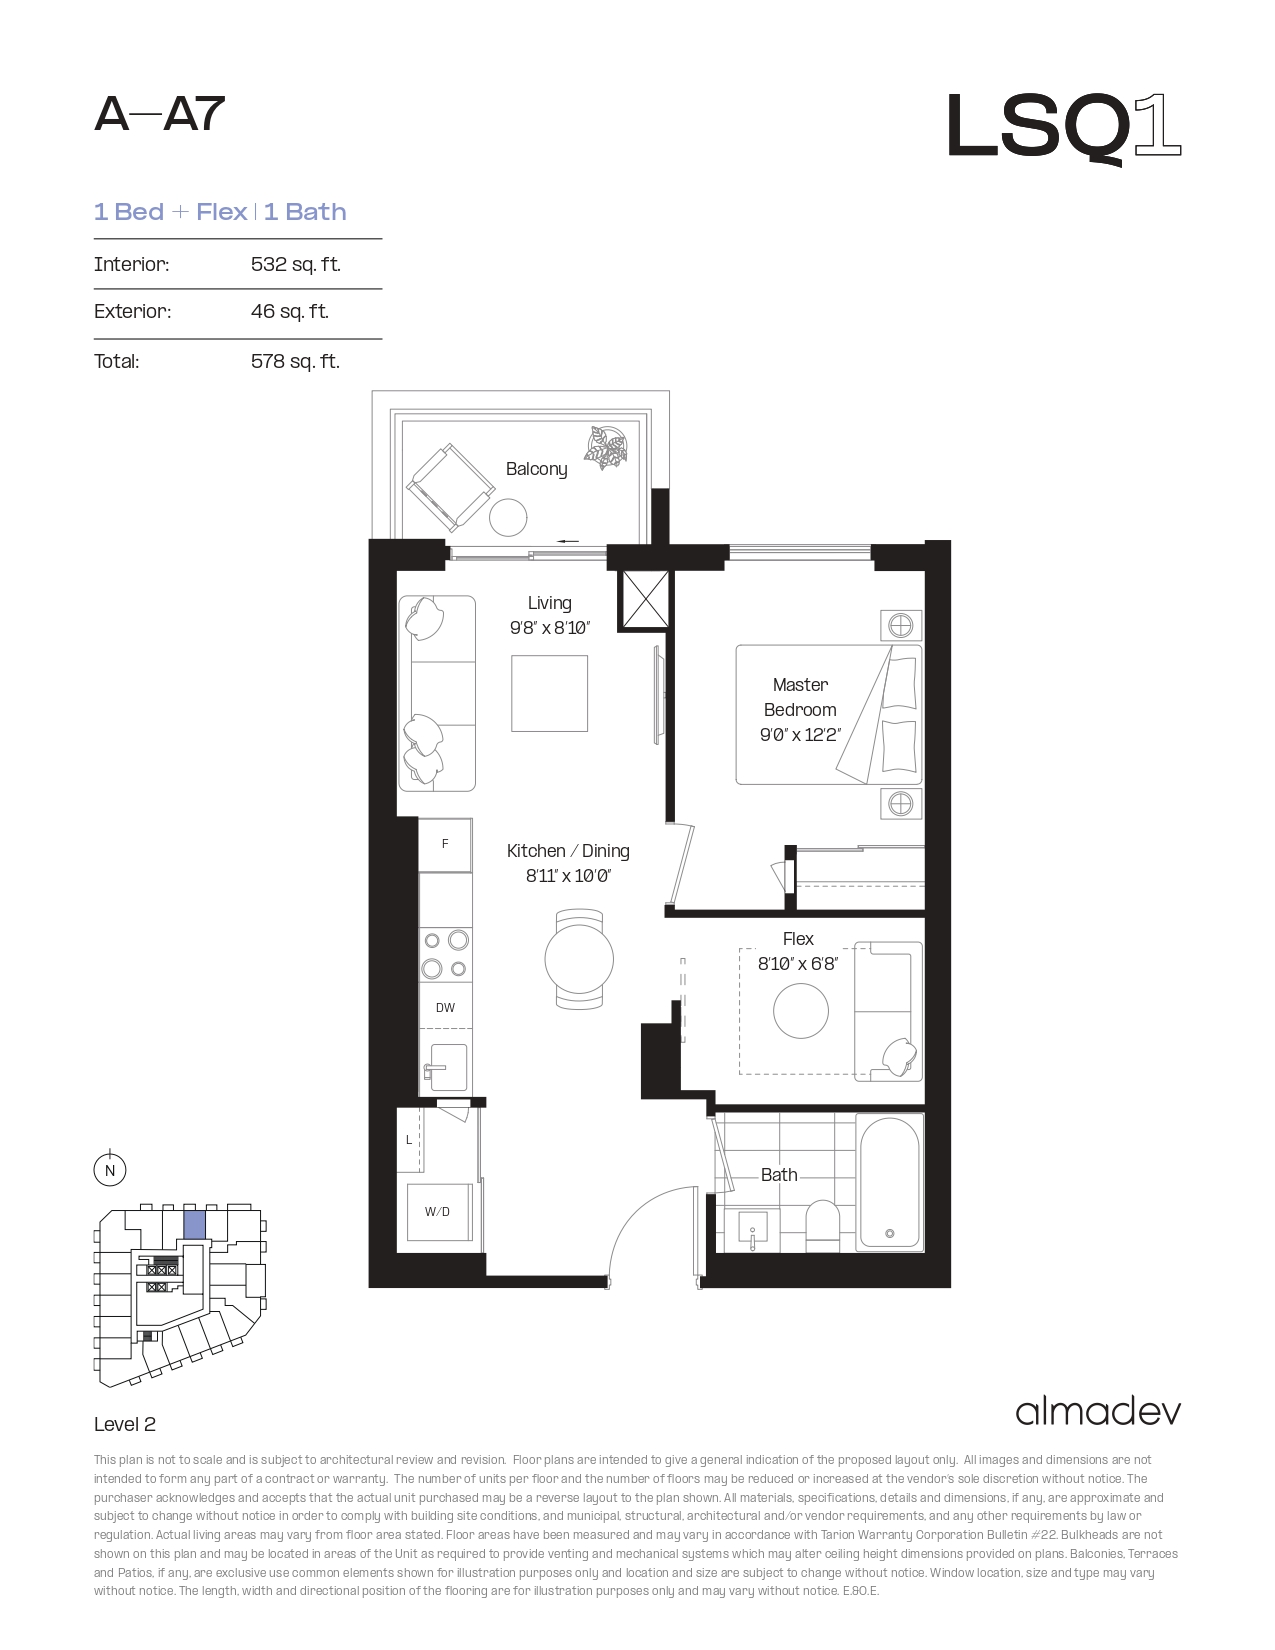 A-A7 Floor Plan of LSQ Condos with undefined beds